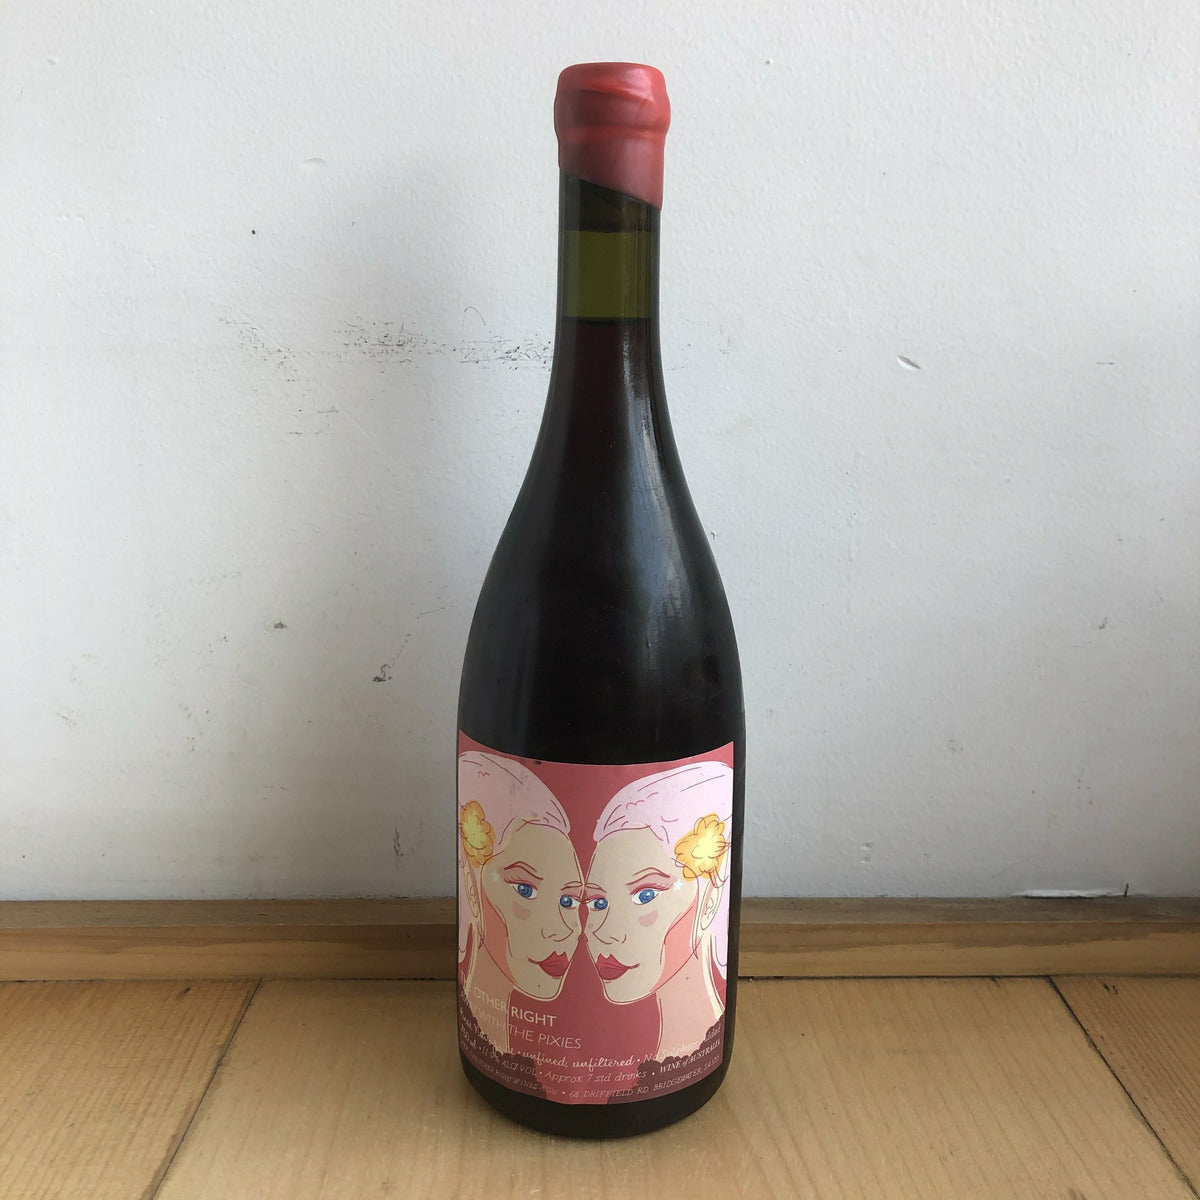 The Other Right "Away With the Pixies" Pinot Noir 2018